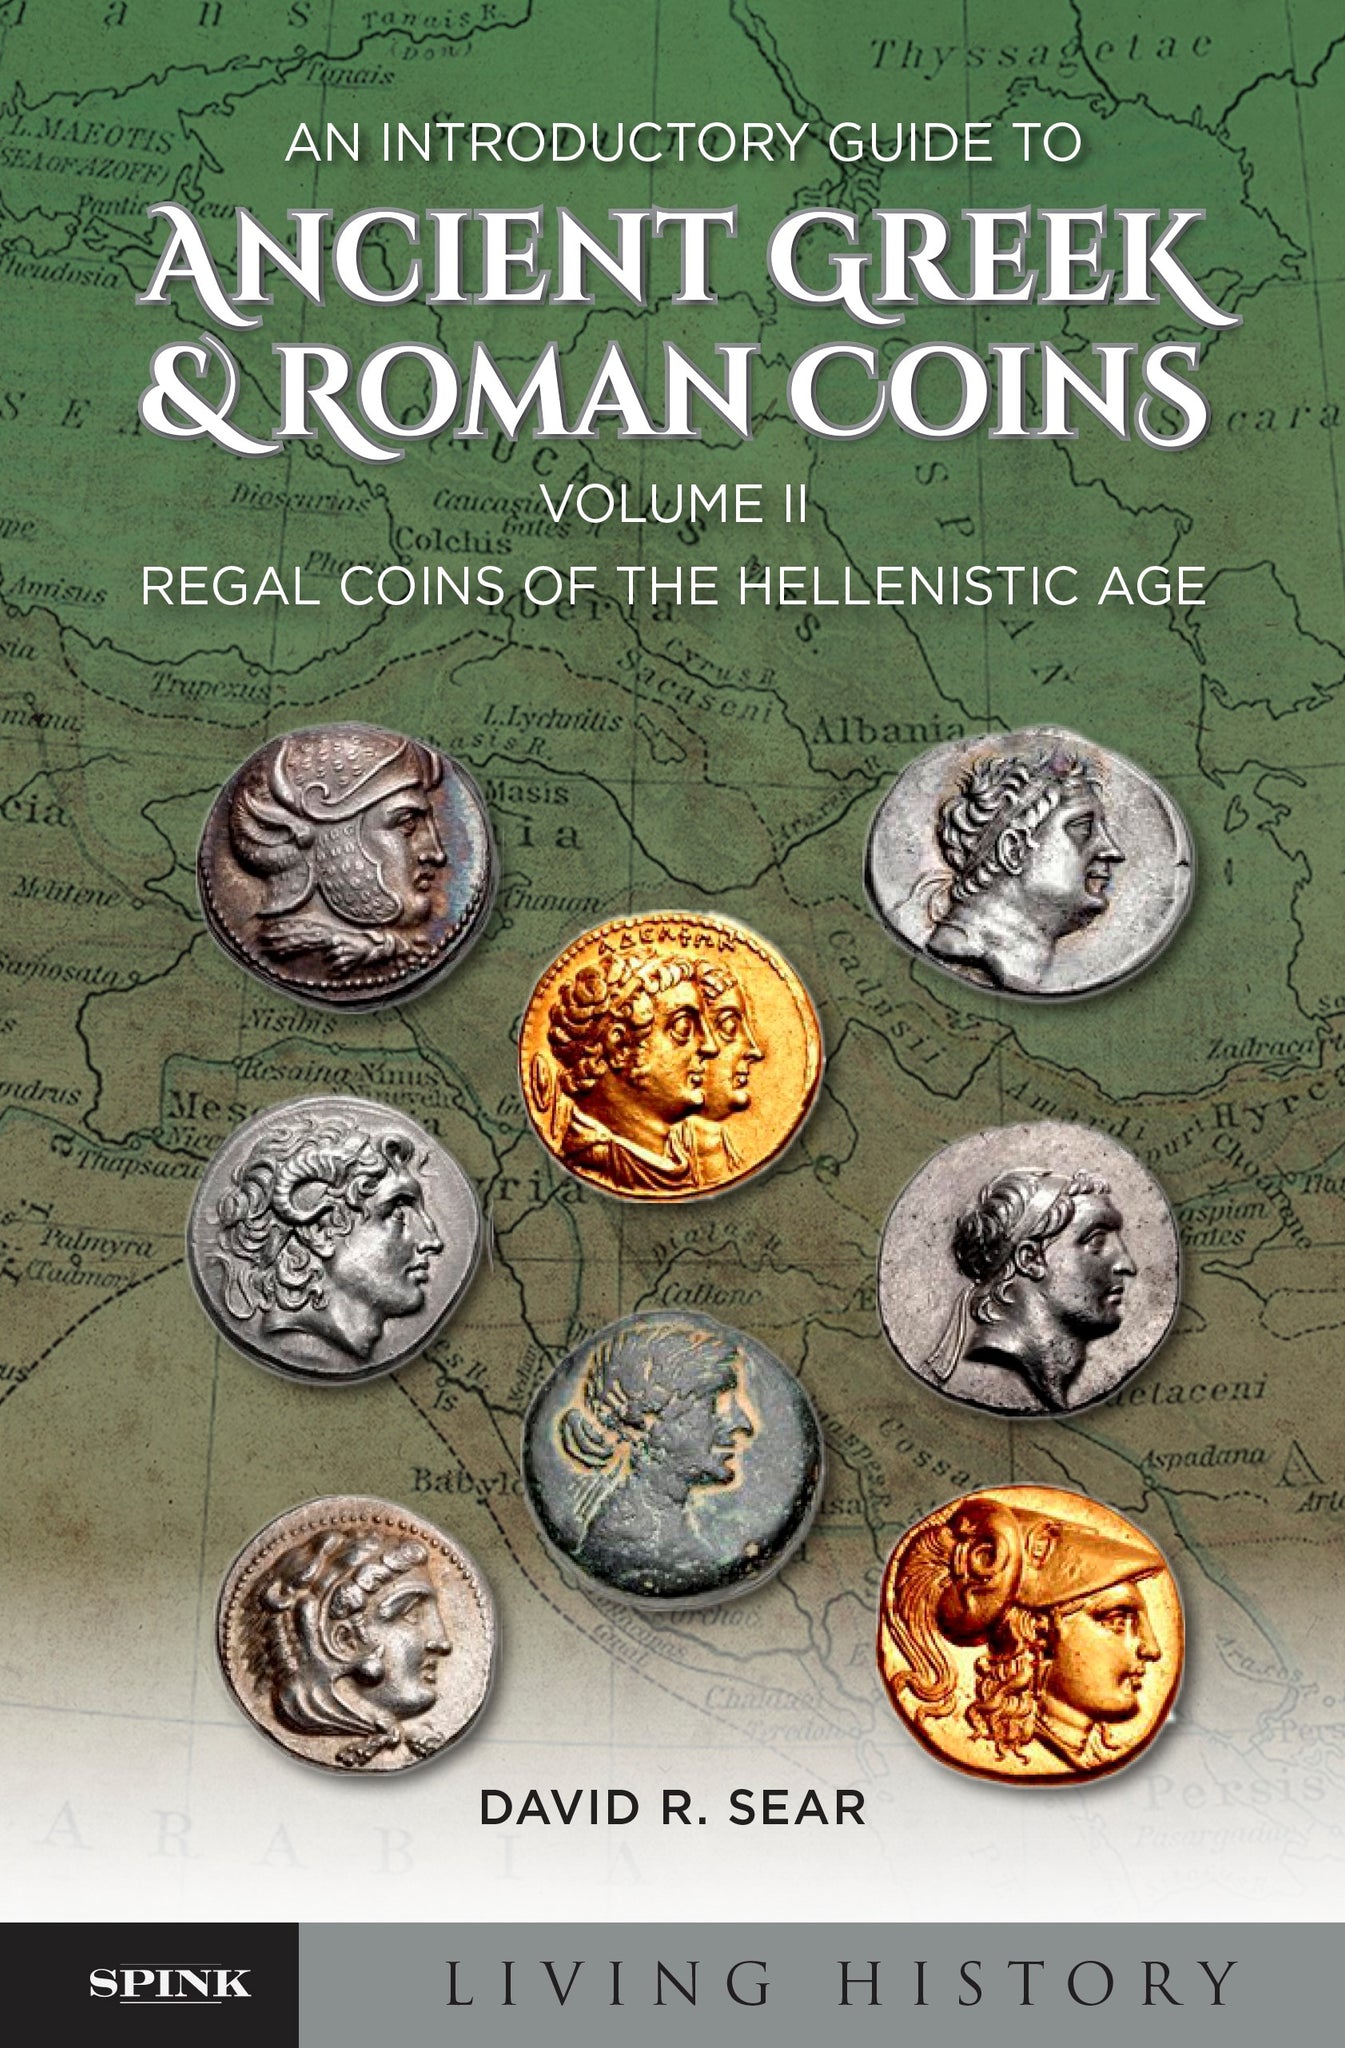 An Introductory Guide to Ancient Greek and Roman Coins Volume II: Regal Coins of the Hellenistic Age (downloadable PDF)